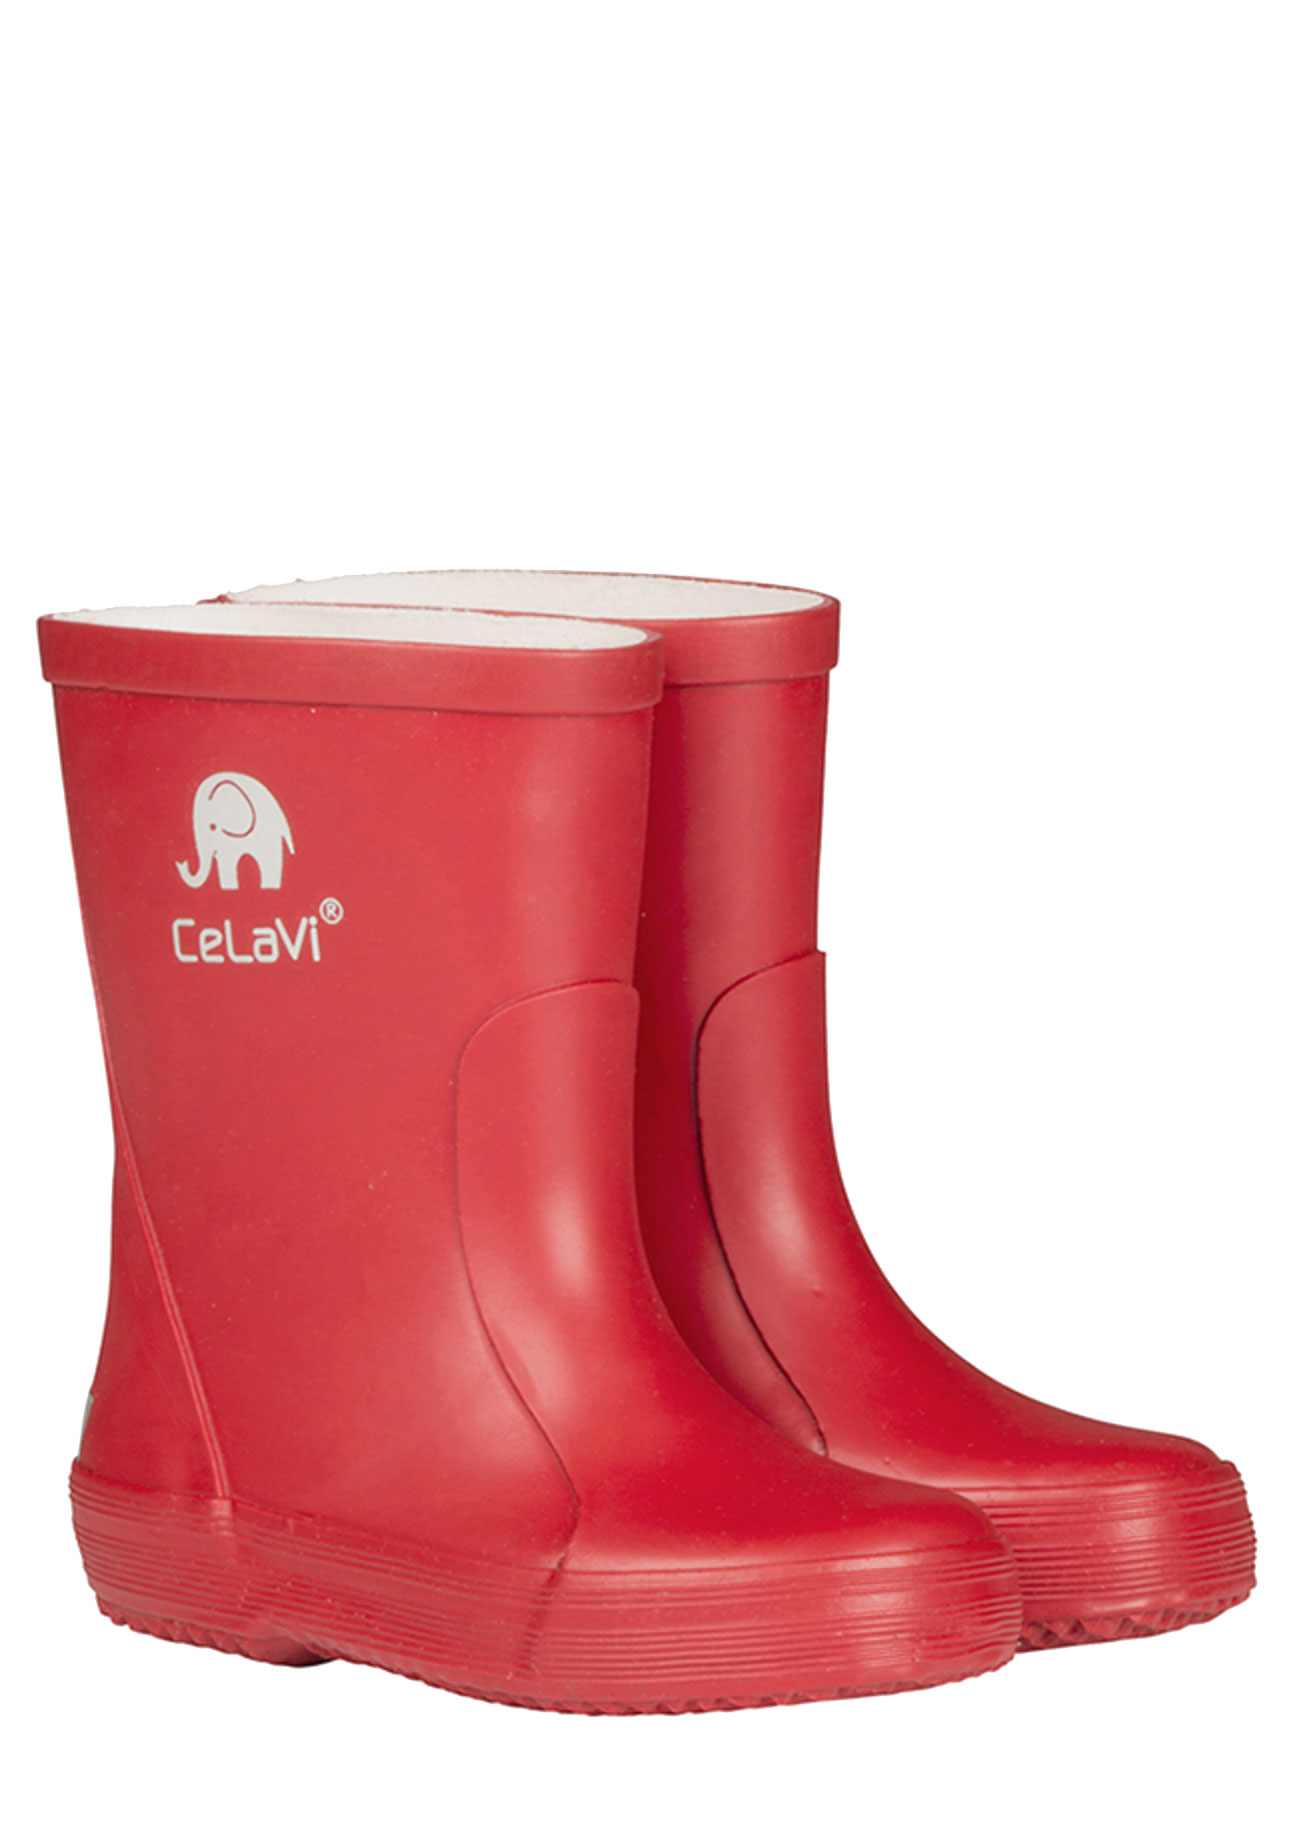 CeLaVi Natural Rubber Wellies